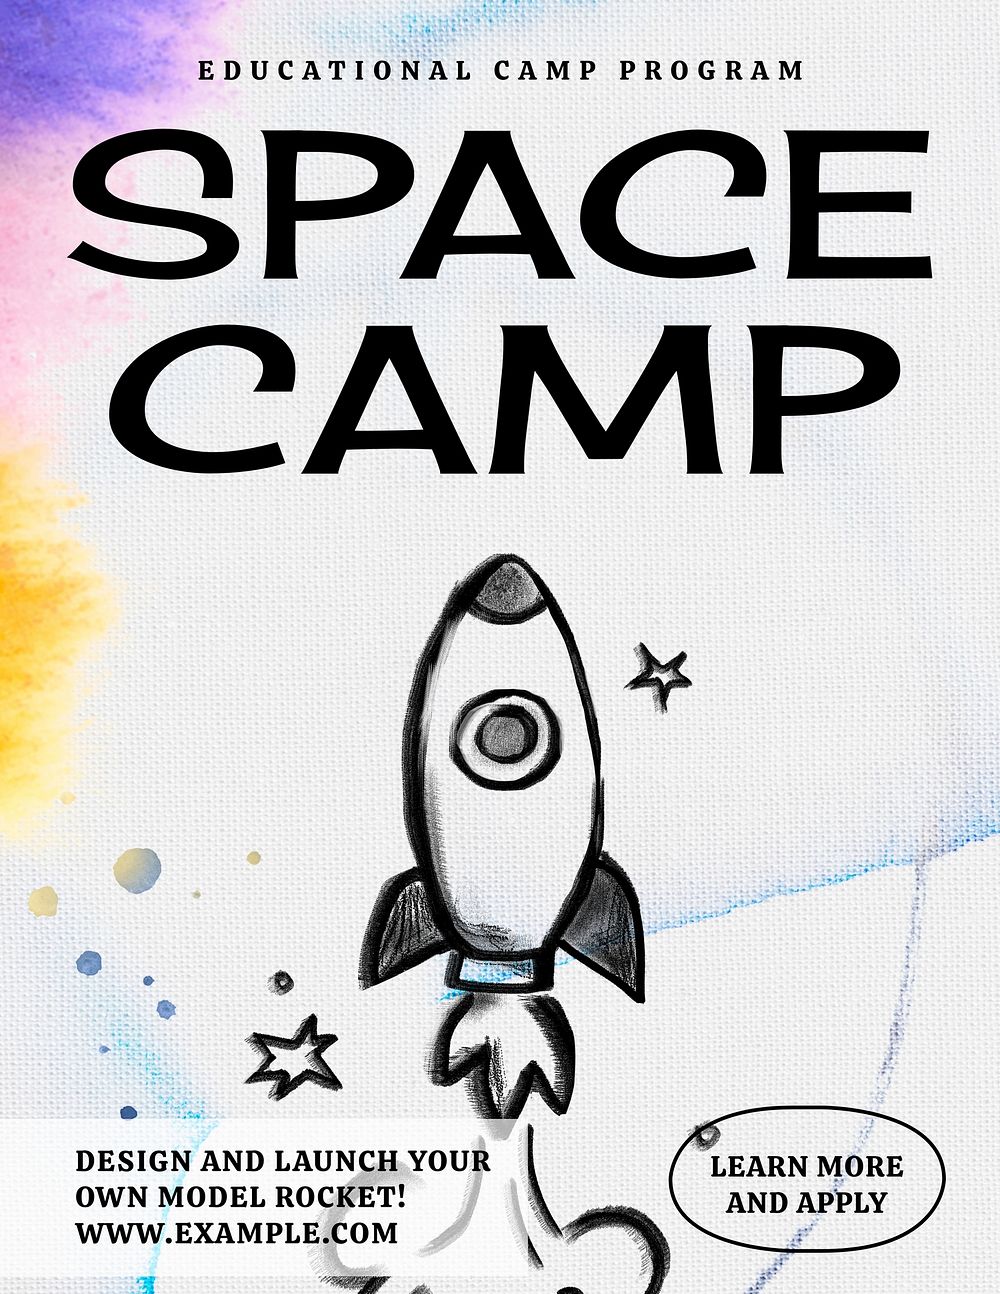 Space camp flyer template advertisement